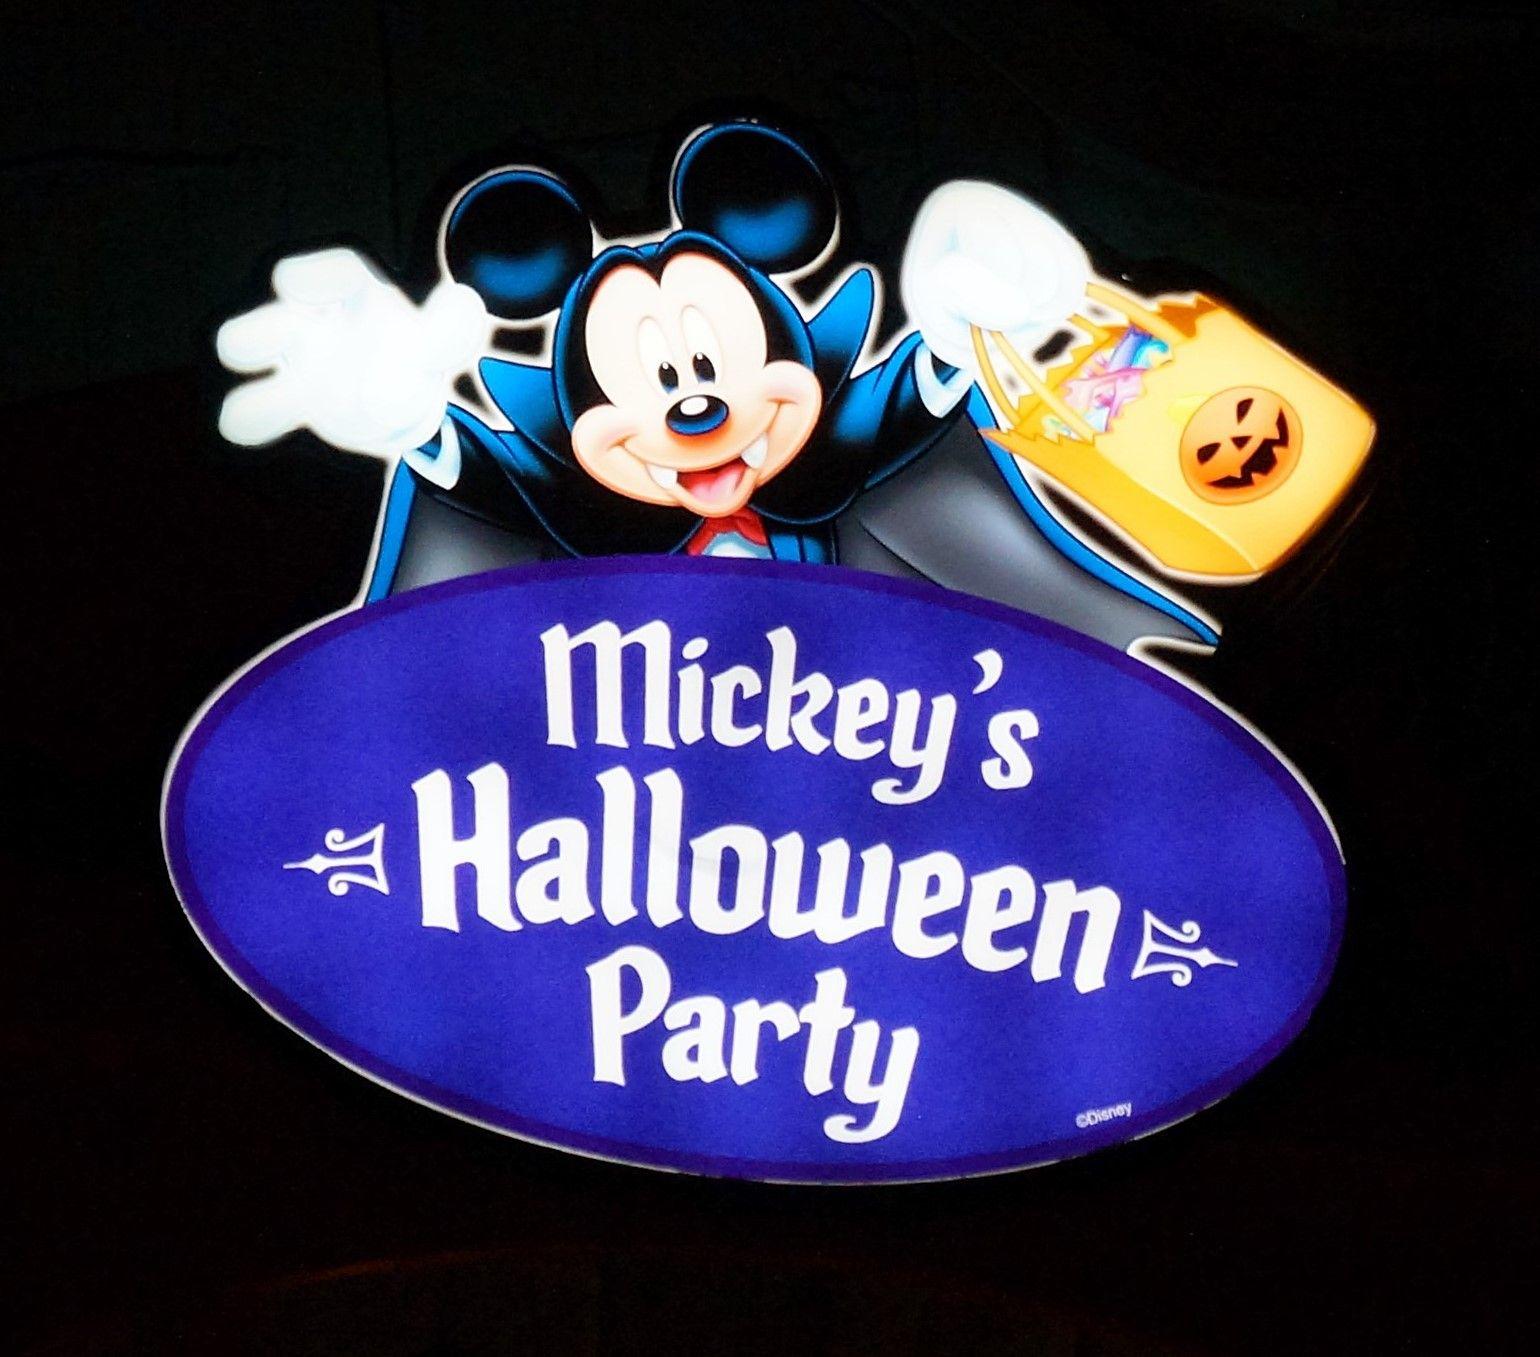 Mickey 2017 Logo - Guide to Mickey's 2017 Halloween Party at Disneyland